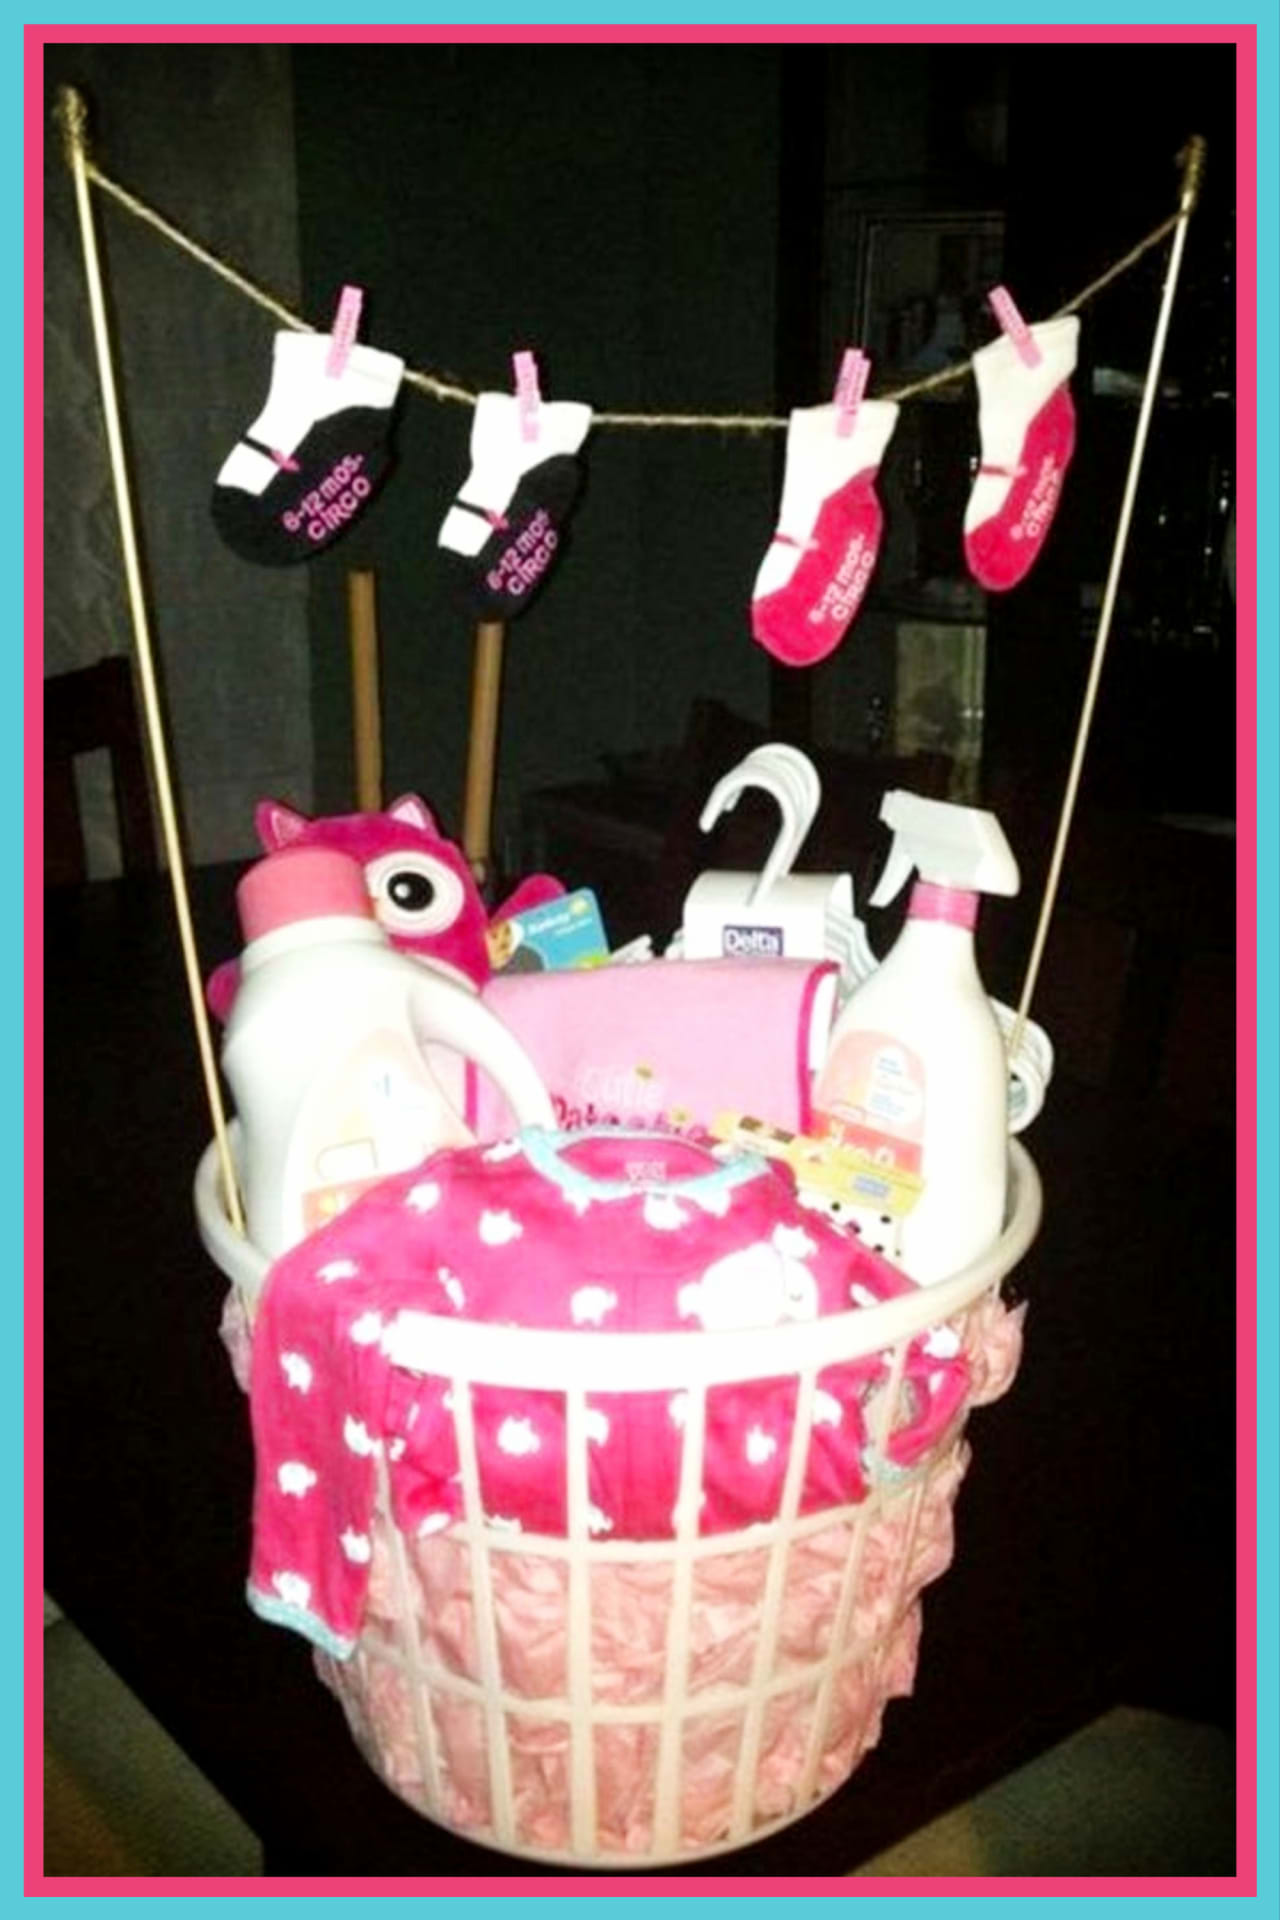 Baby shower gift ideas - homemade baby shower gifts and cheap baby gift ideas for those on a budget